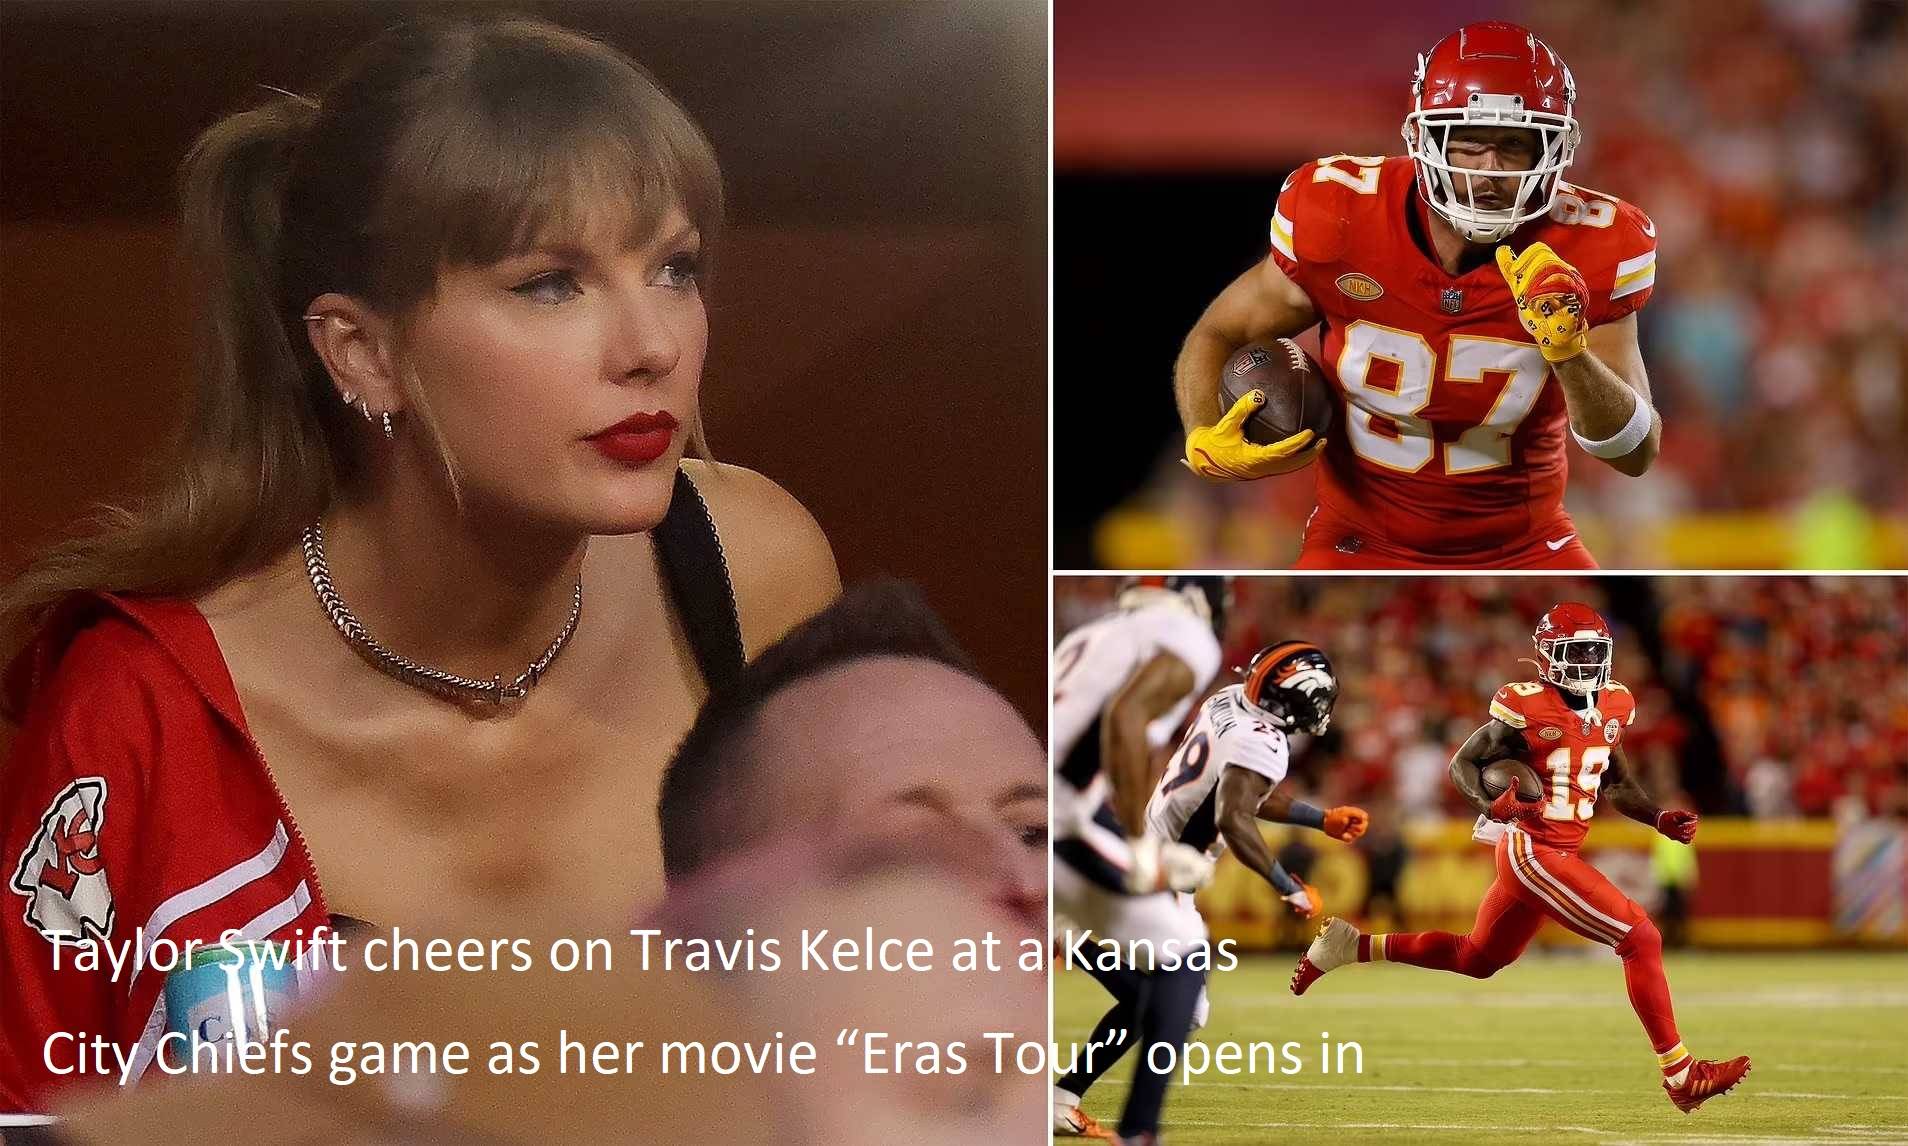 Taylor Swift cheers on Travis Kelce at a Kansas City Chiefs game as her movie “Eras Tour” opens in theaters.